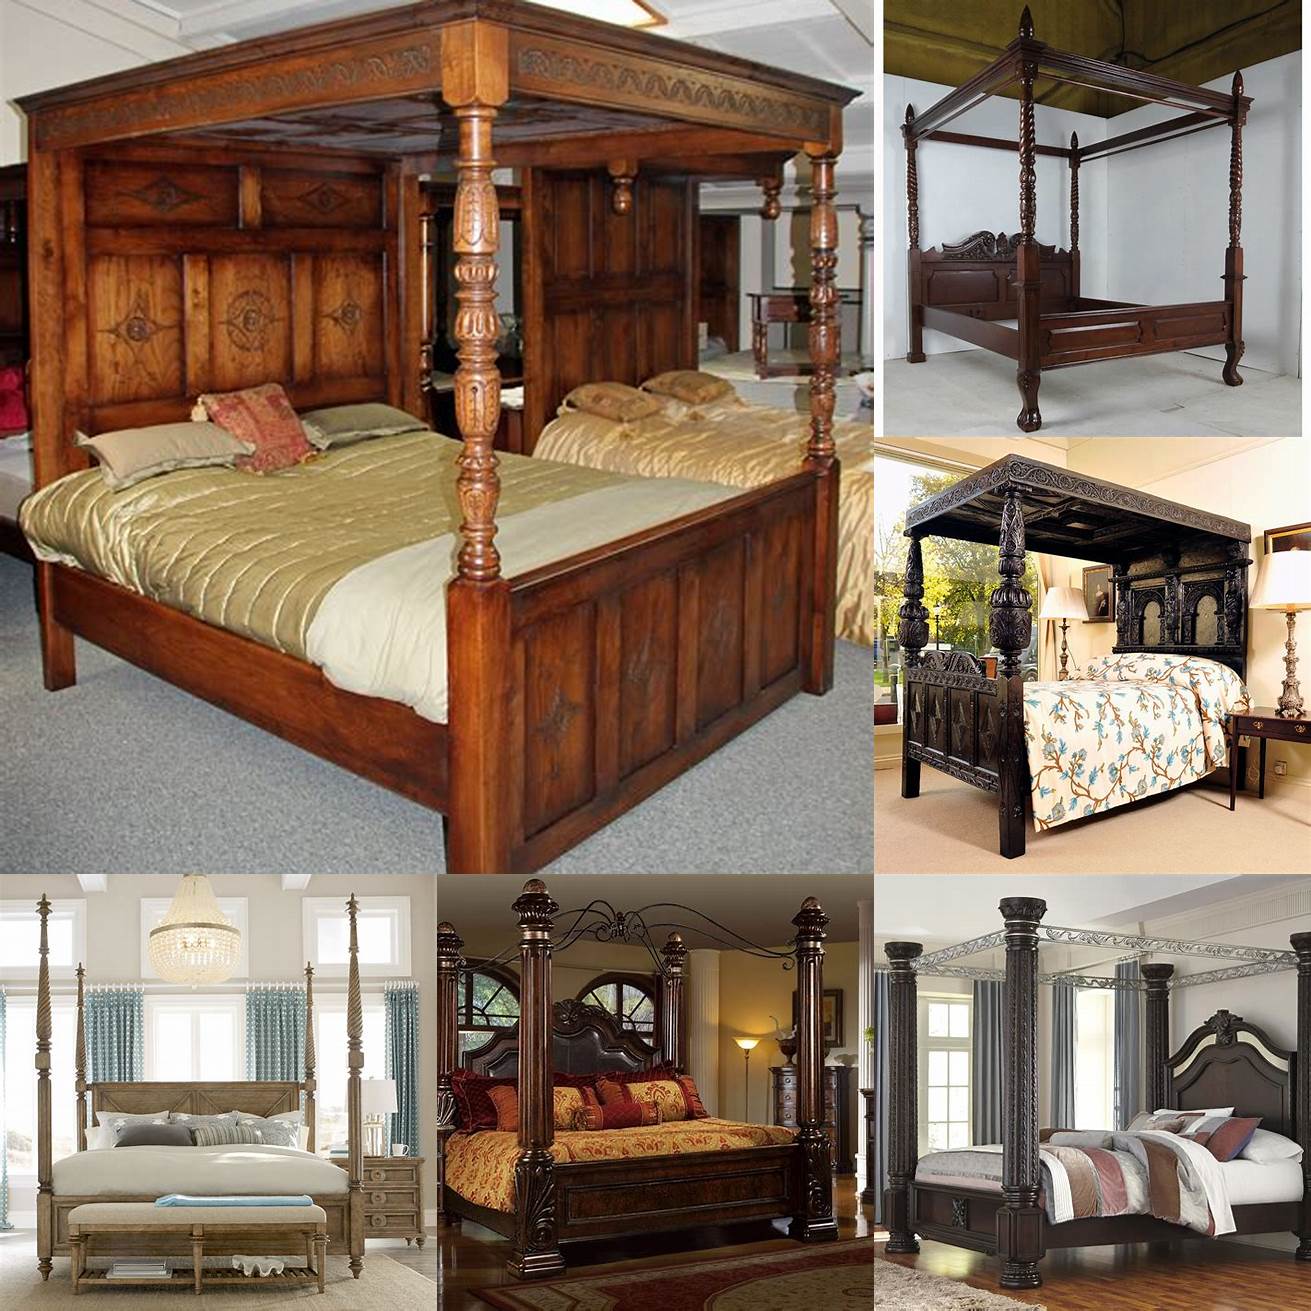 Four-Poster Bed